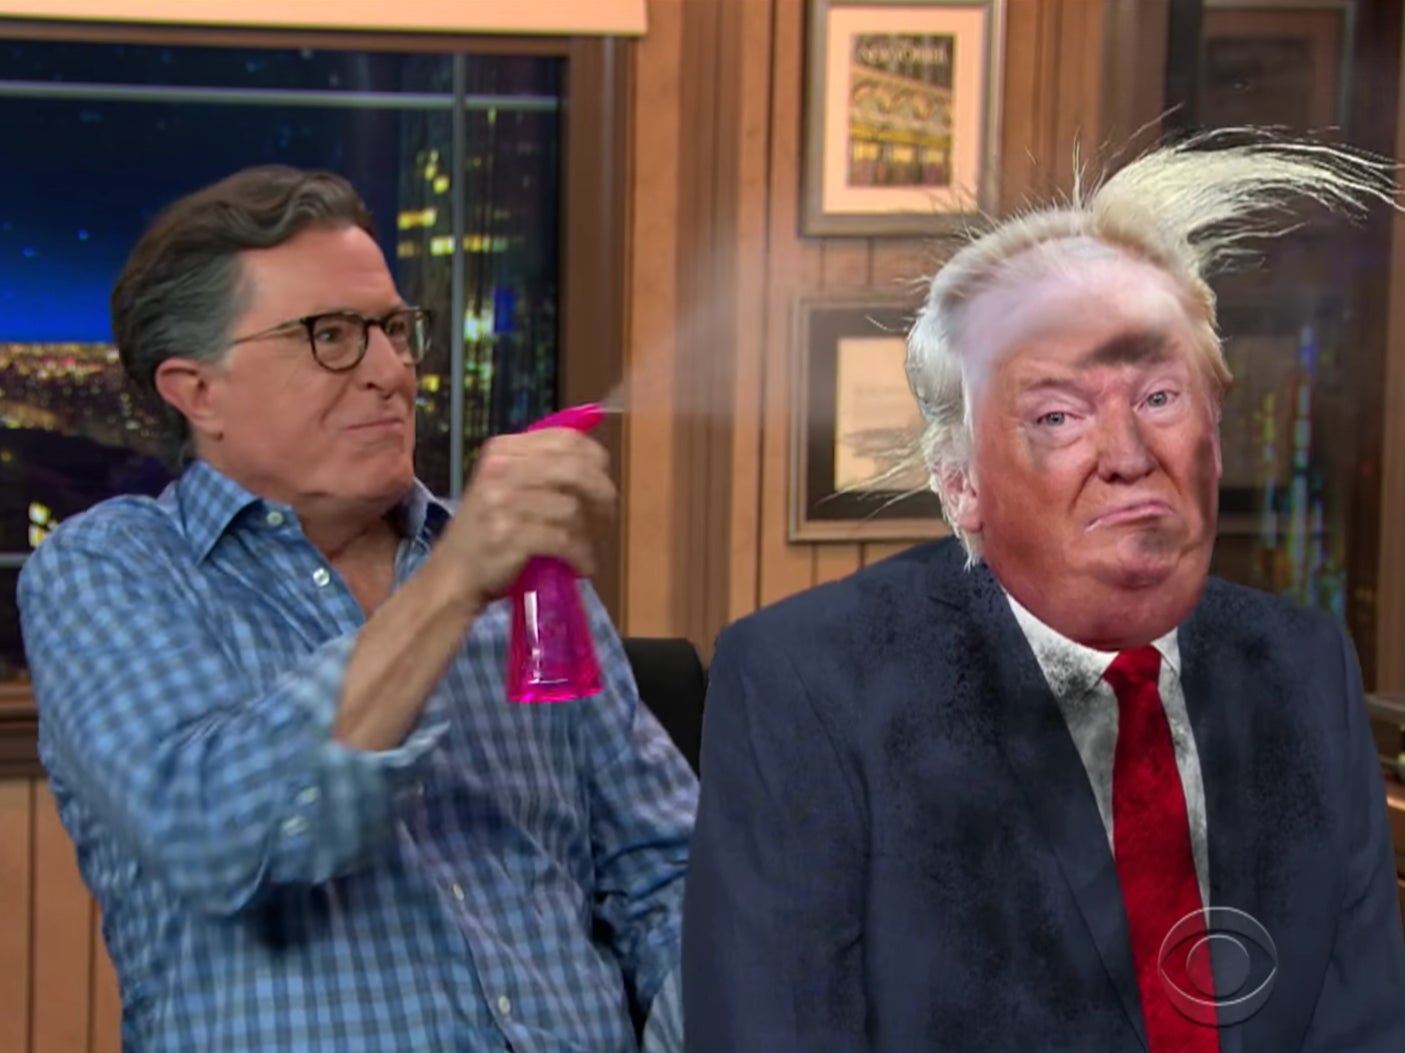 Stephen Colbert covered the final presidential debate of the 2020 election on his late show on 22 October